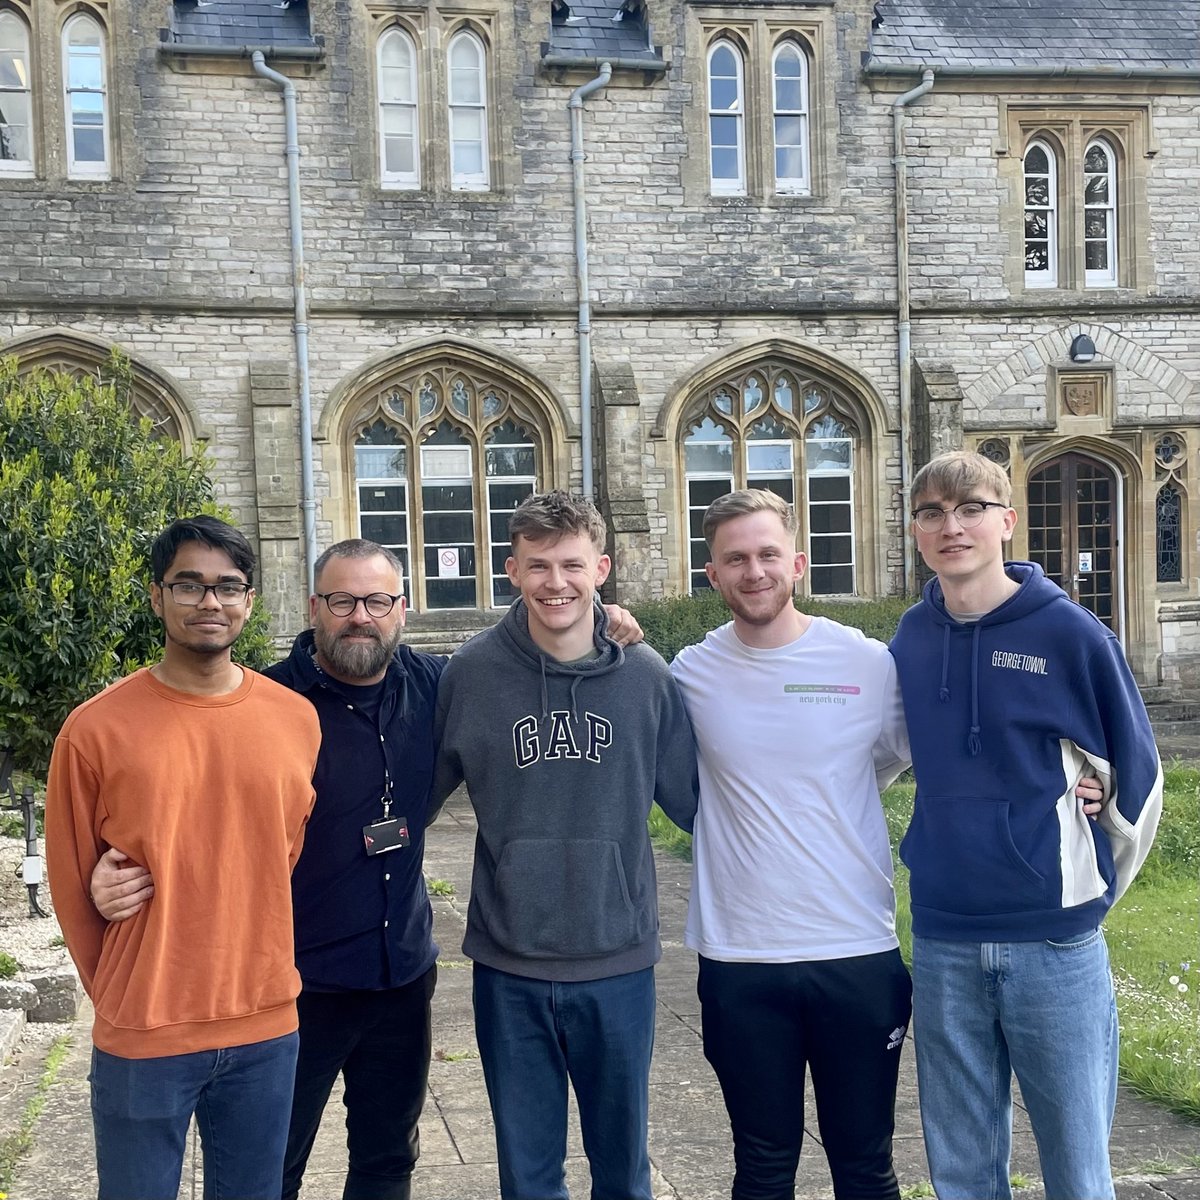 🧵The full crew of our Pompey MSc Analysis placement students on campus after the winning the league. 

#1stTeamAnalyst Mahrus Ahmed & Joe Hill
#RecruitmentAnalyst Haydn Thomas
#AcademyAnalyst Lewis Slaughter

Looking fwd to sharing their insights via @UOCAnalysis platforms soon